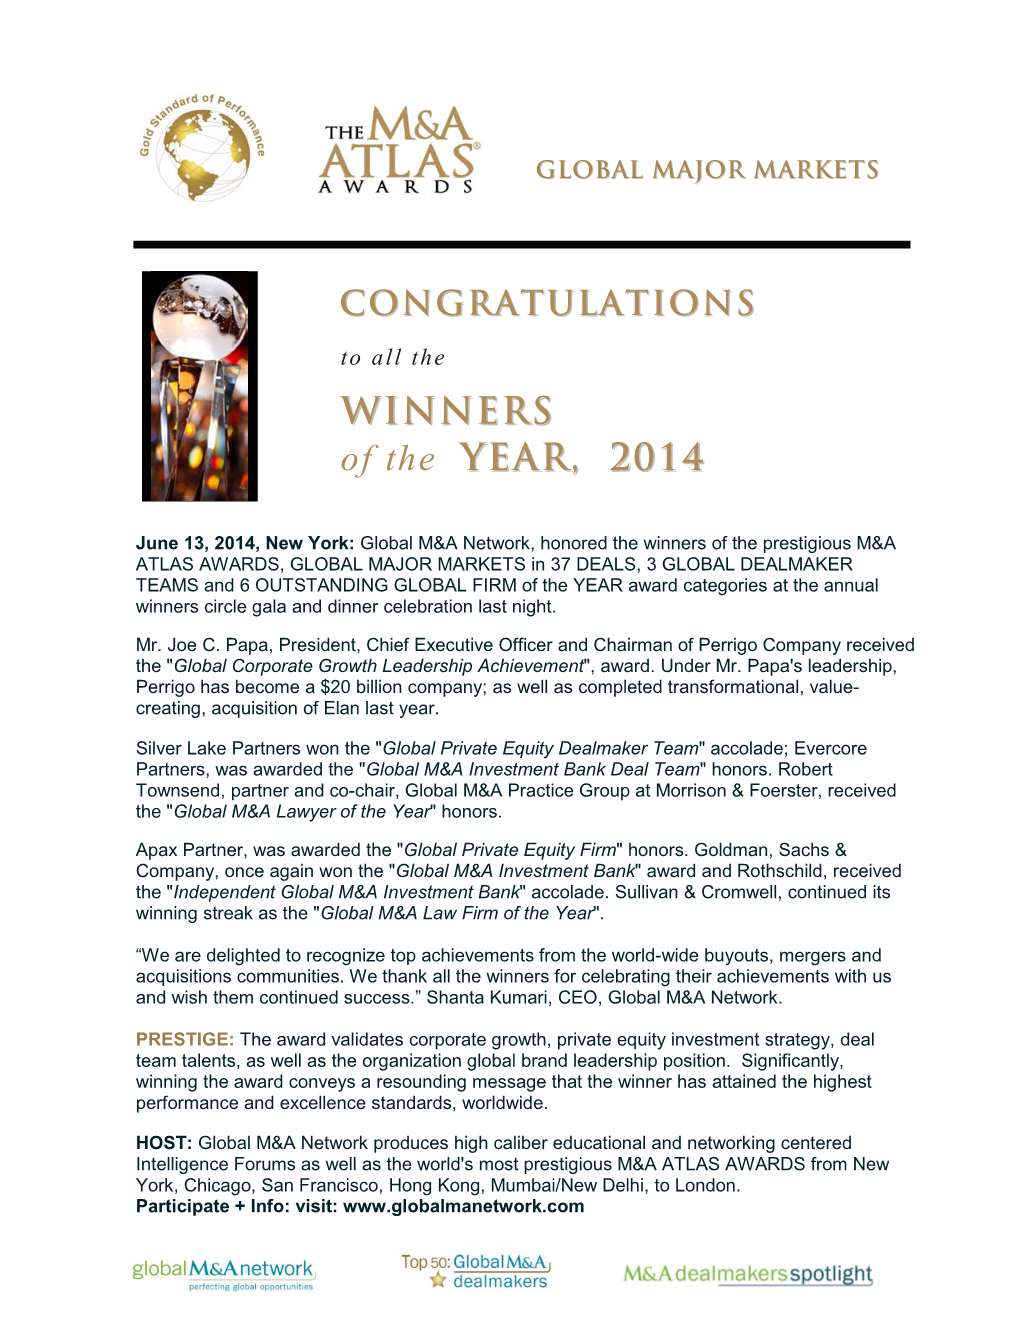 CONGRATULATIONS: 2014 Winners Honored at M&A